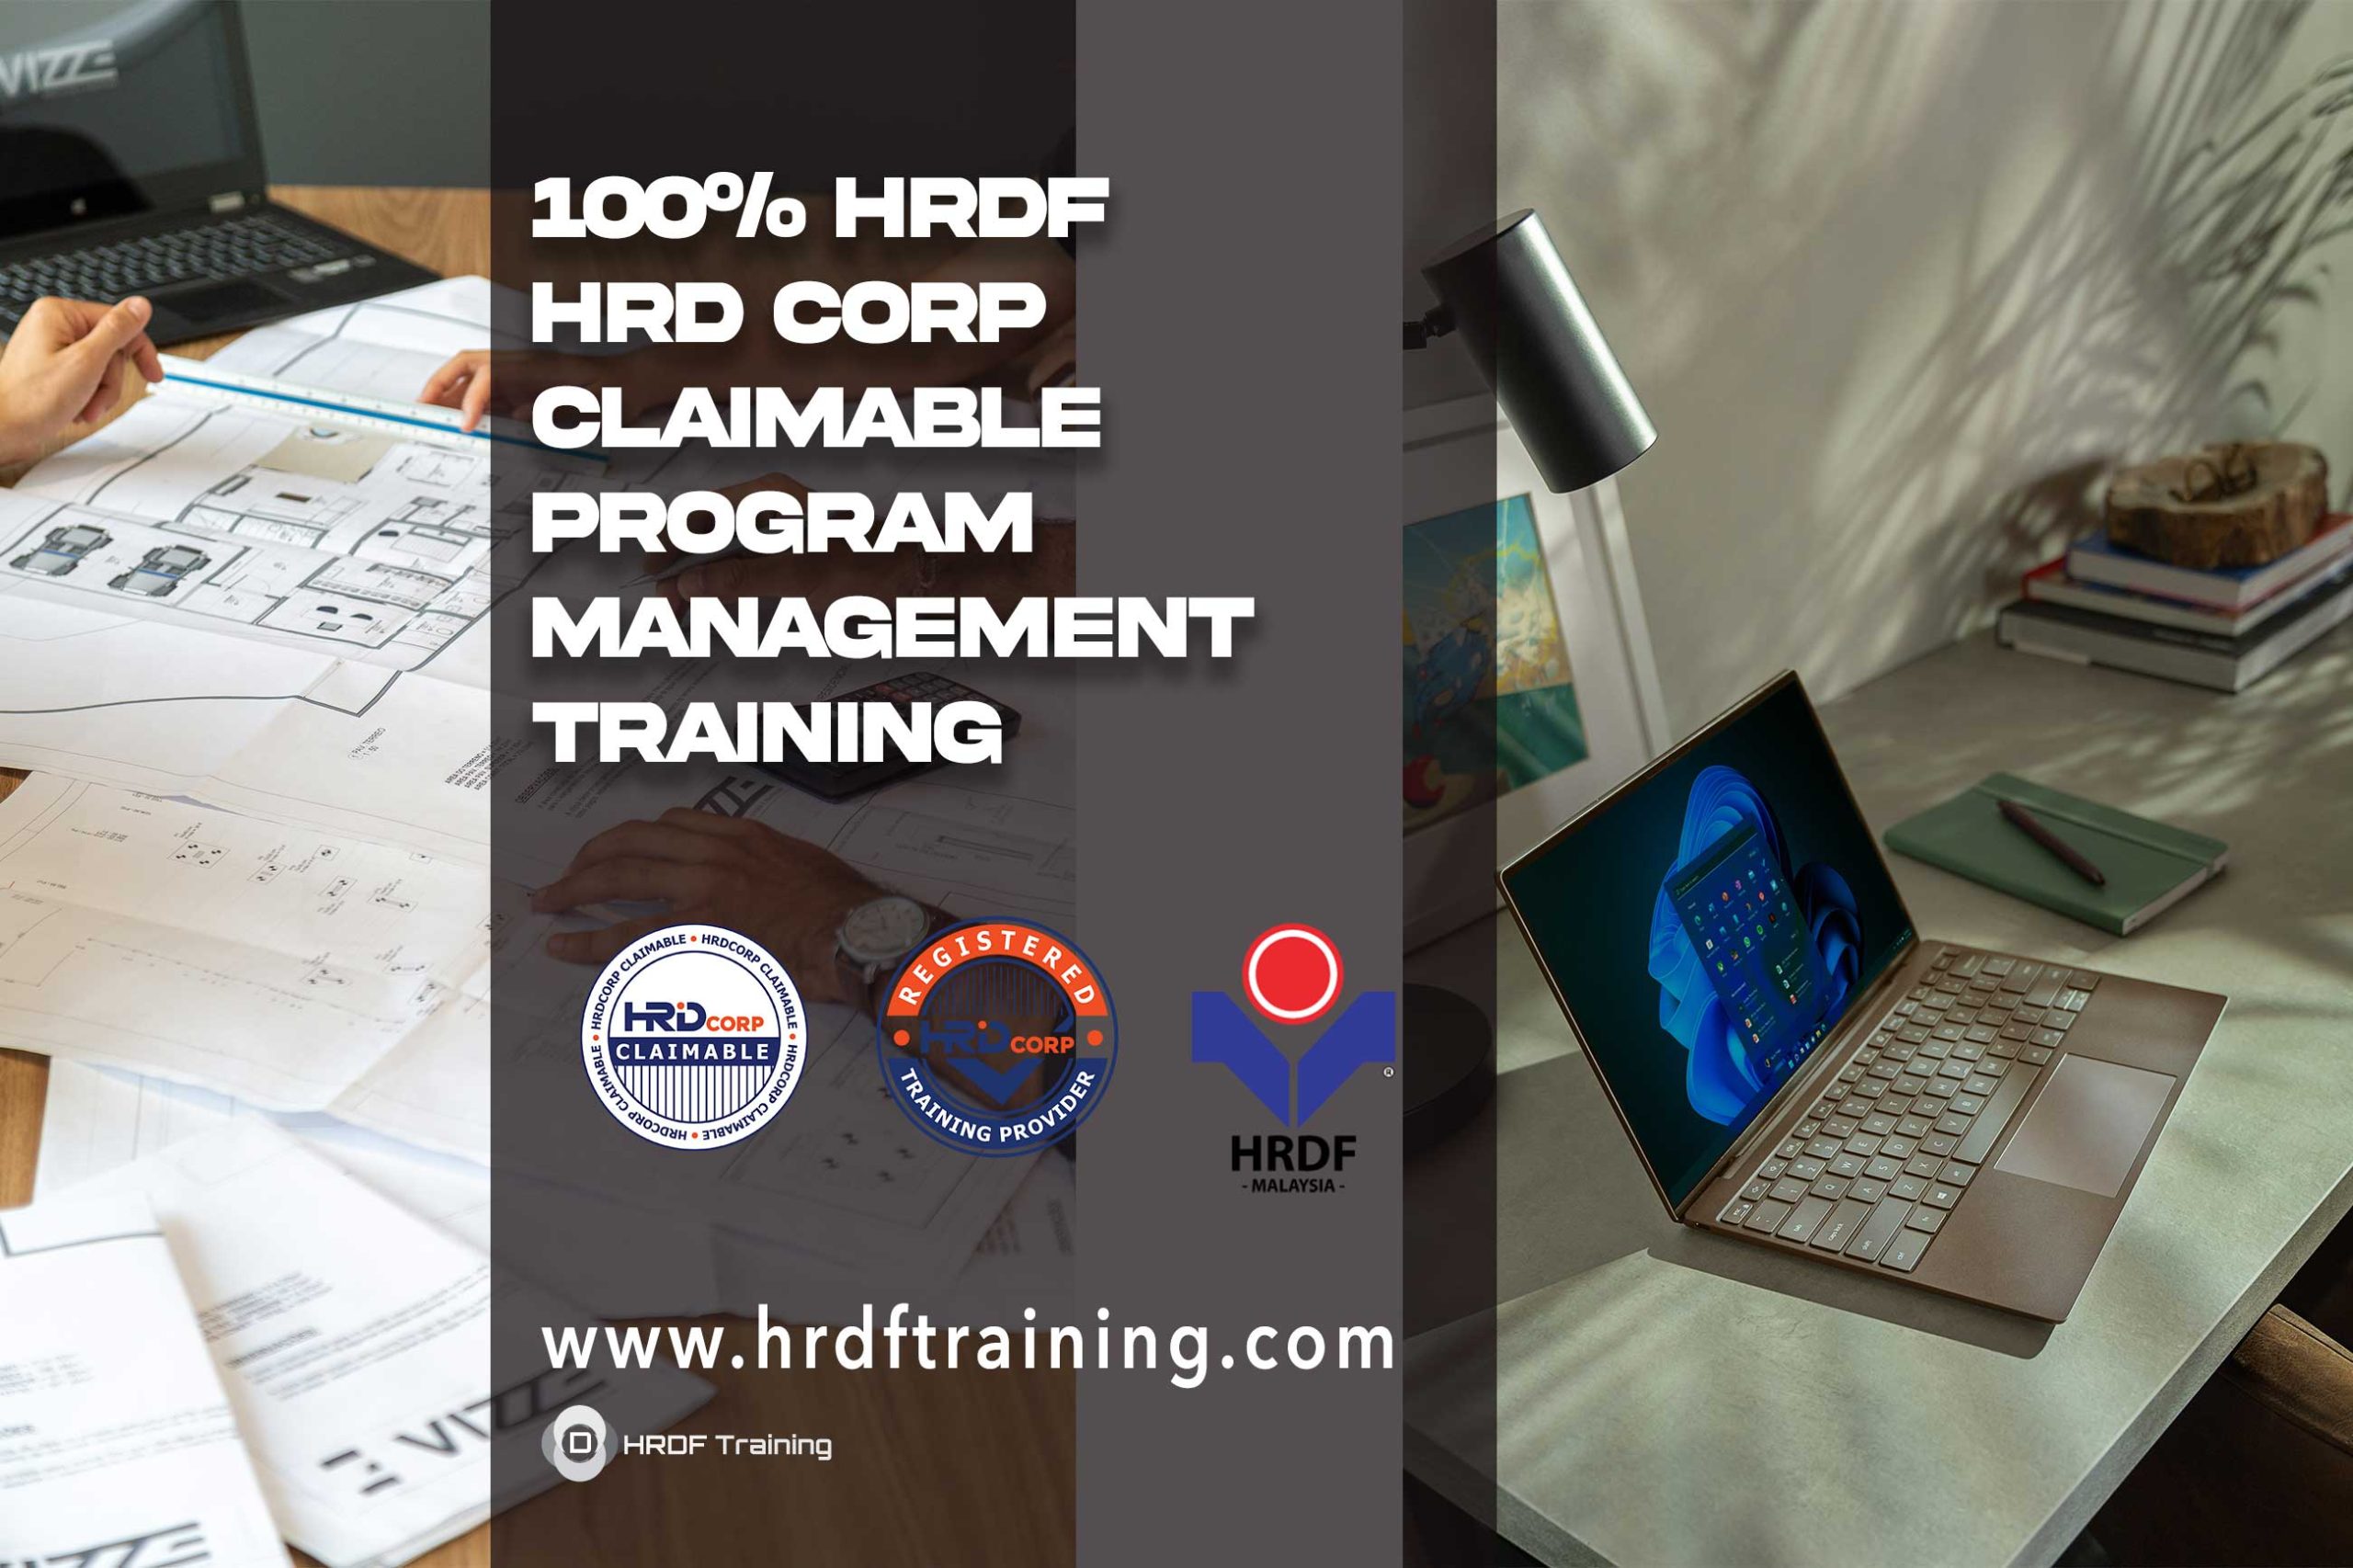 HRDF-HRD-Corp-Claimable-Program-Management-Training